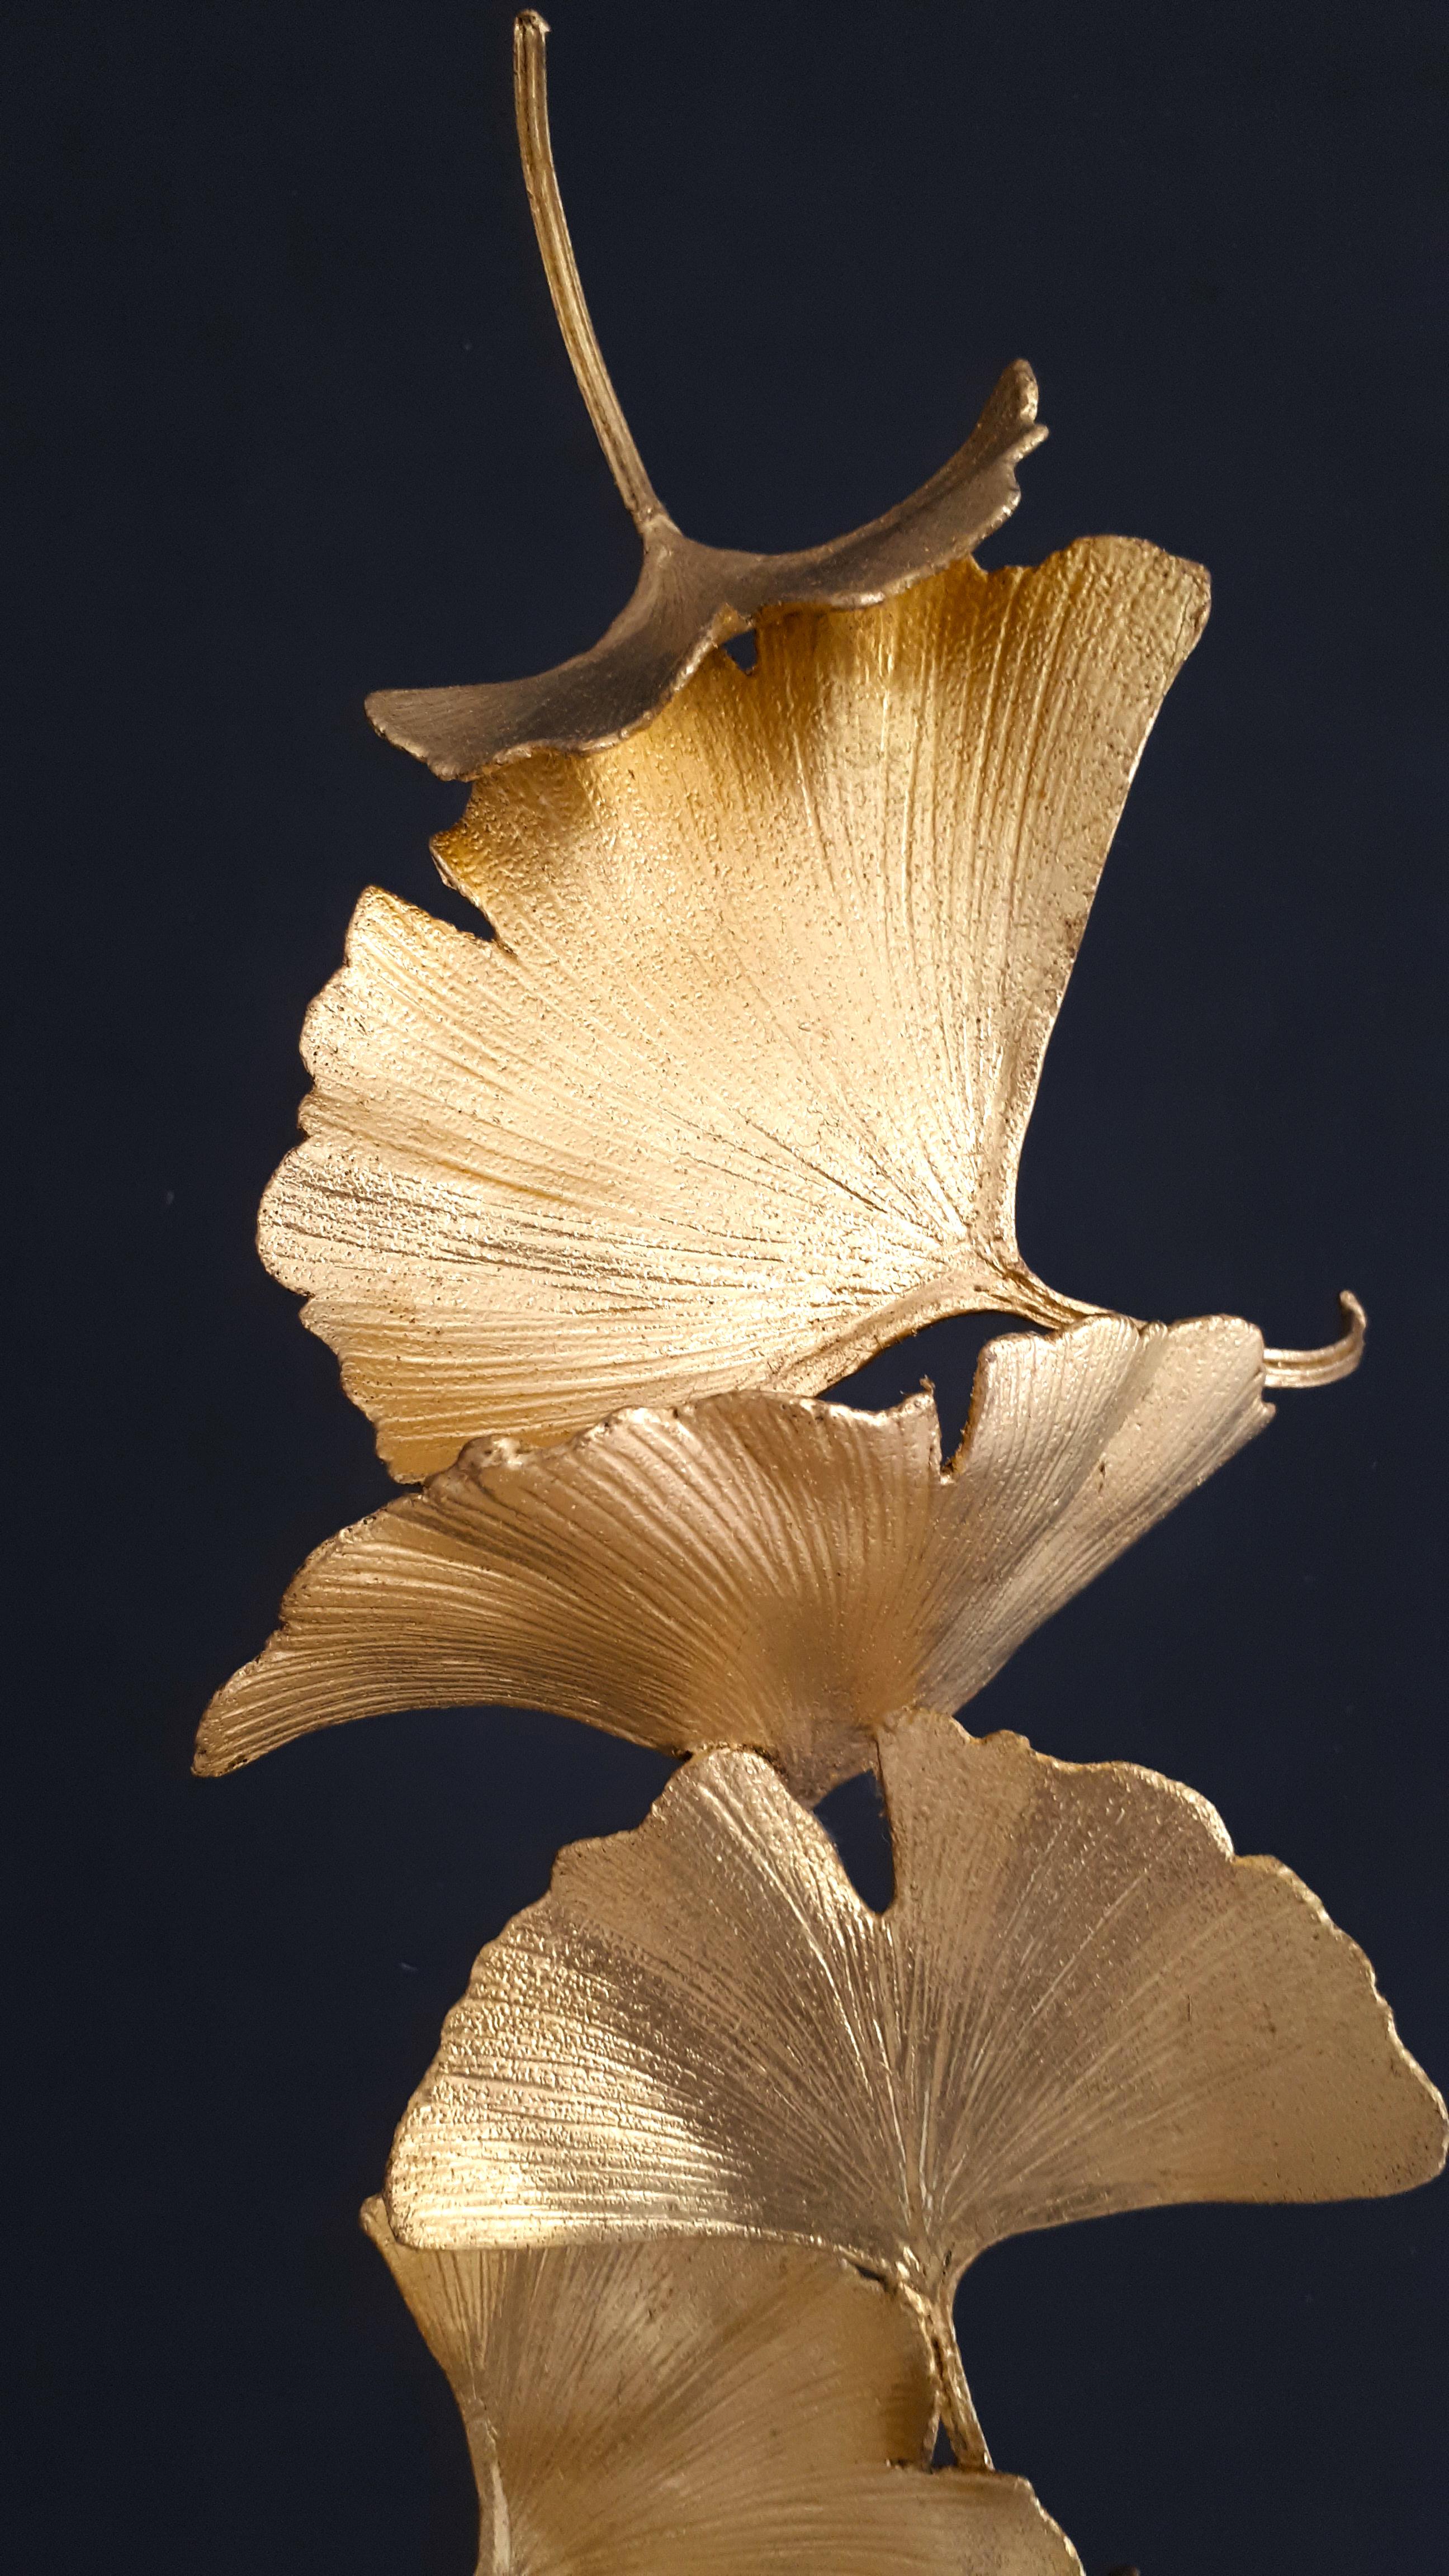 7 Golden Gingko Leaves by Kuno Vollet Gold leaf, brass on white marble base For Sale 2